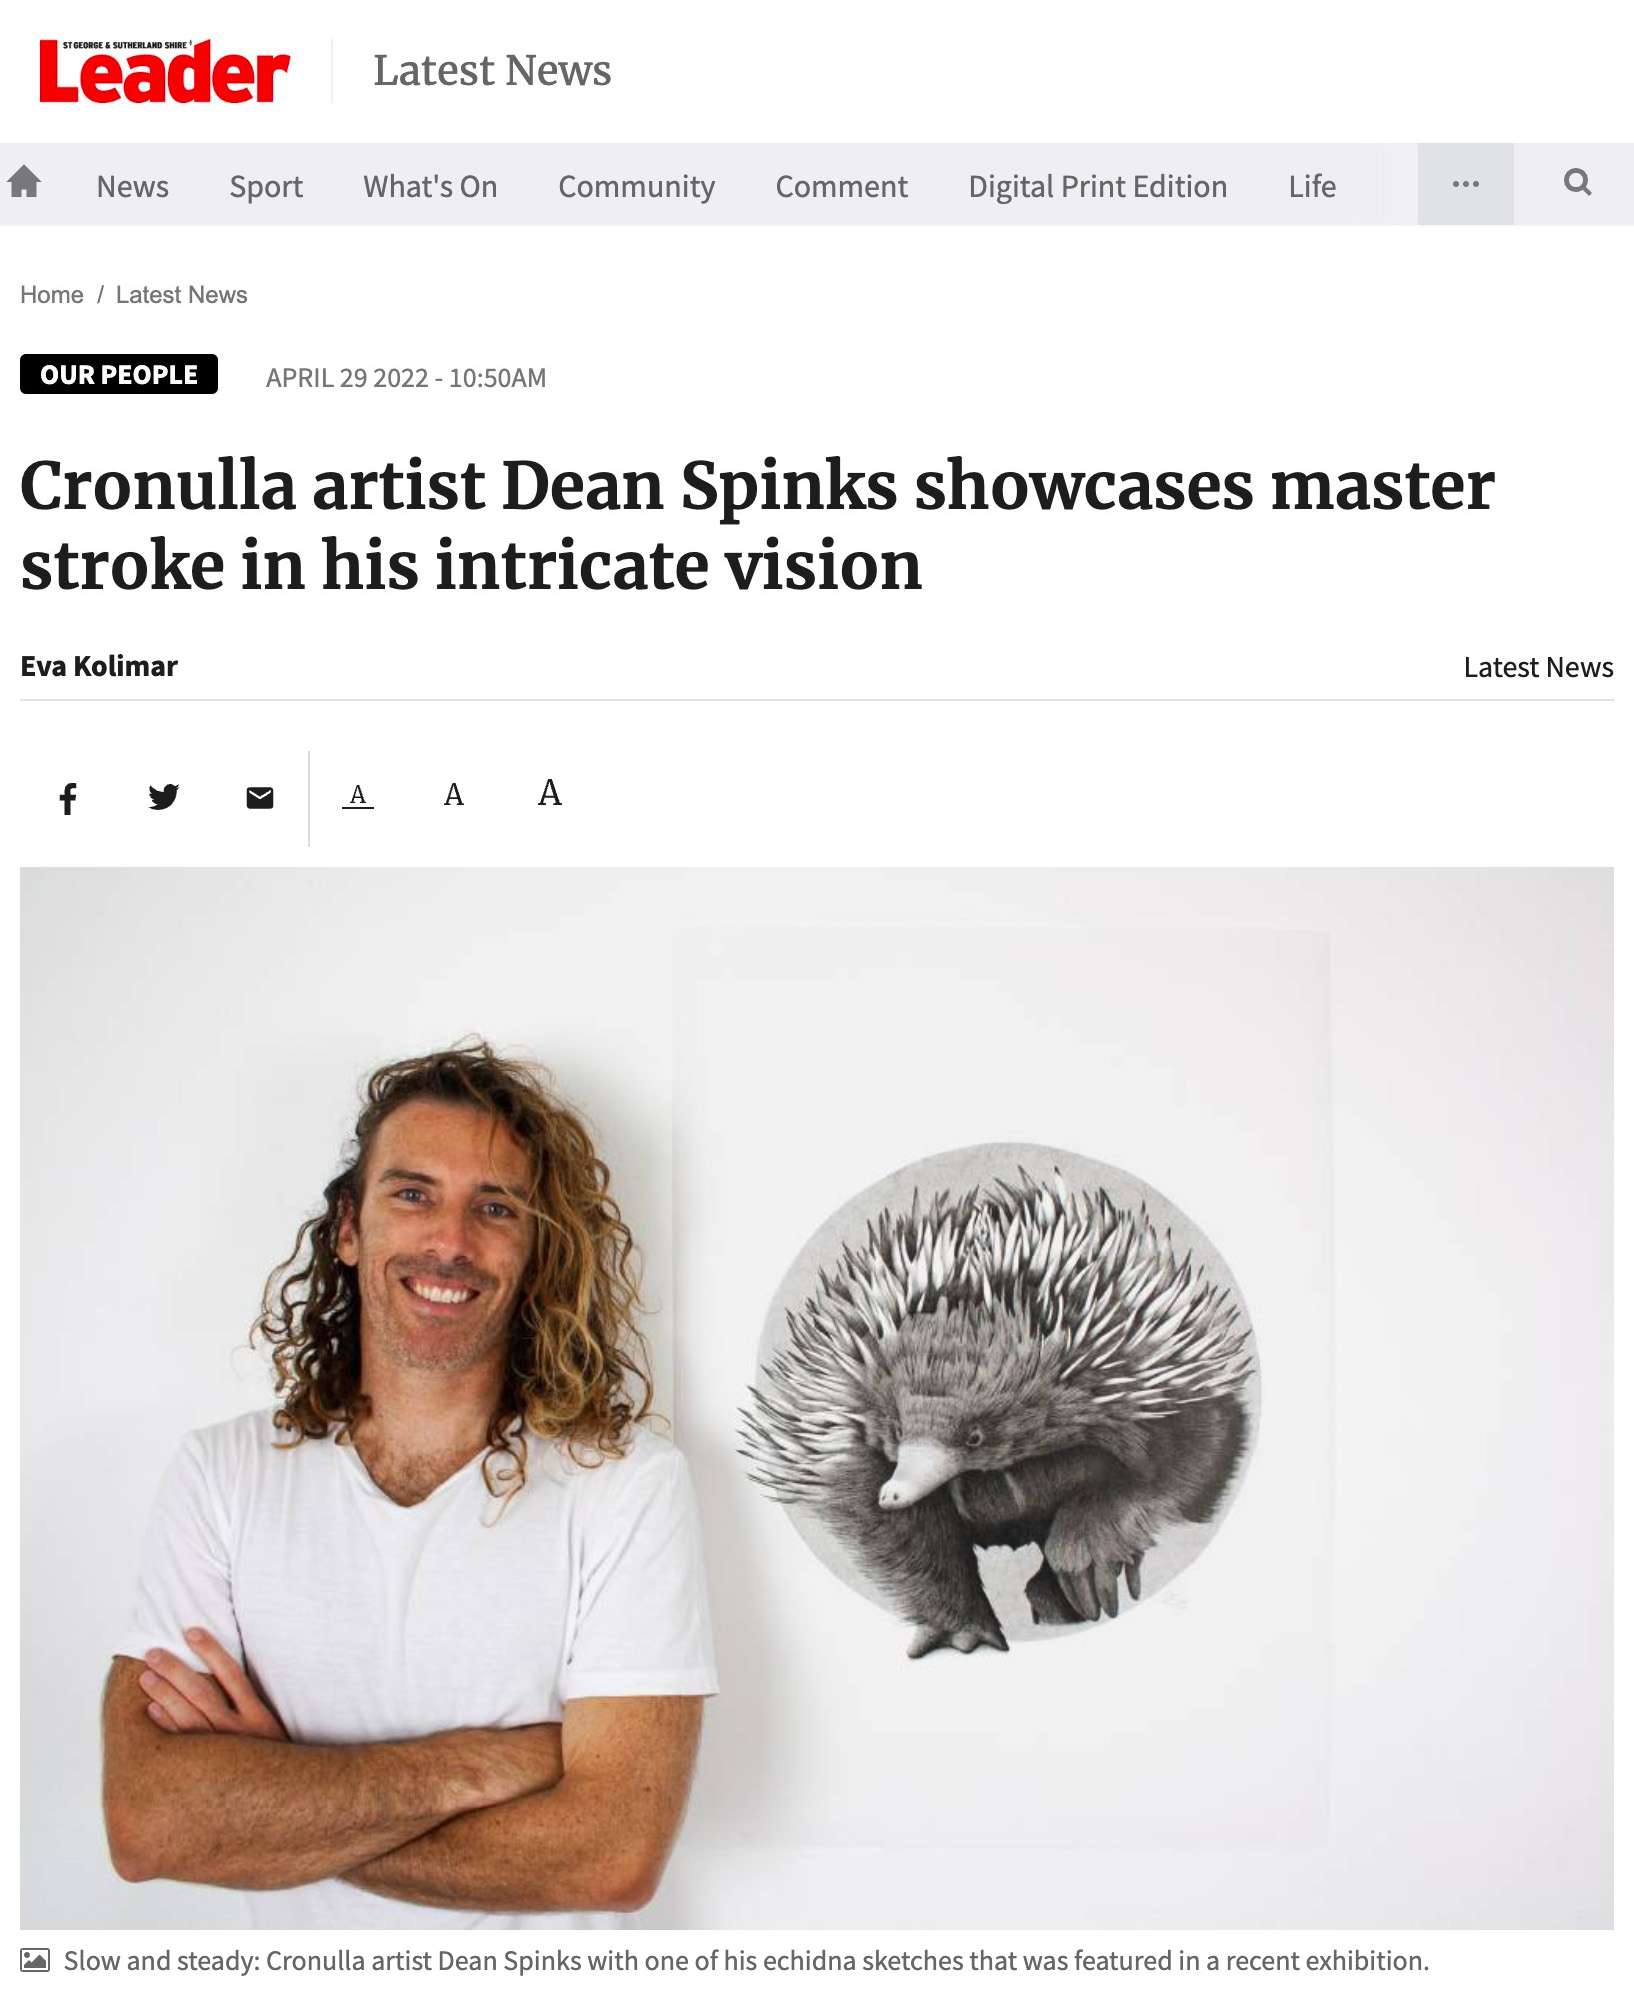 The Leader news article artist profile